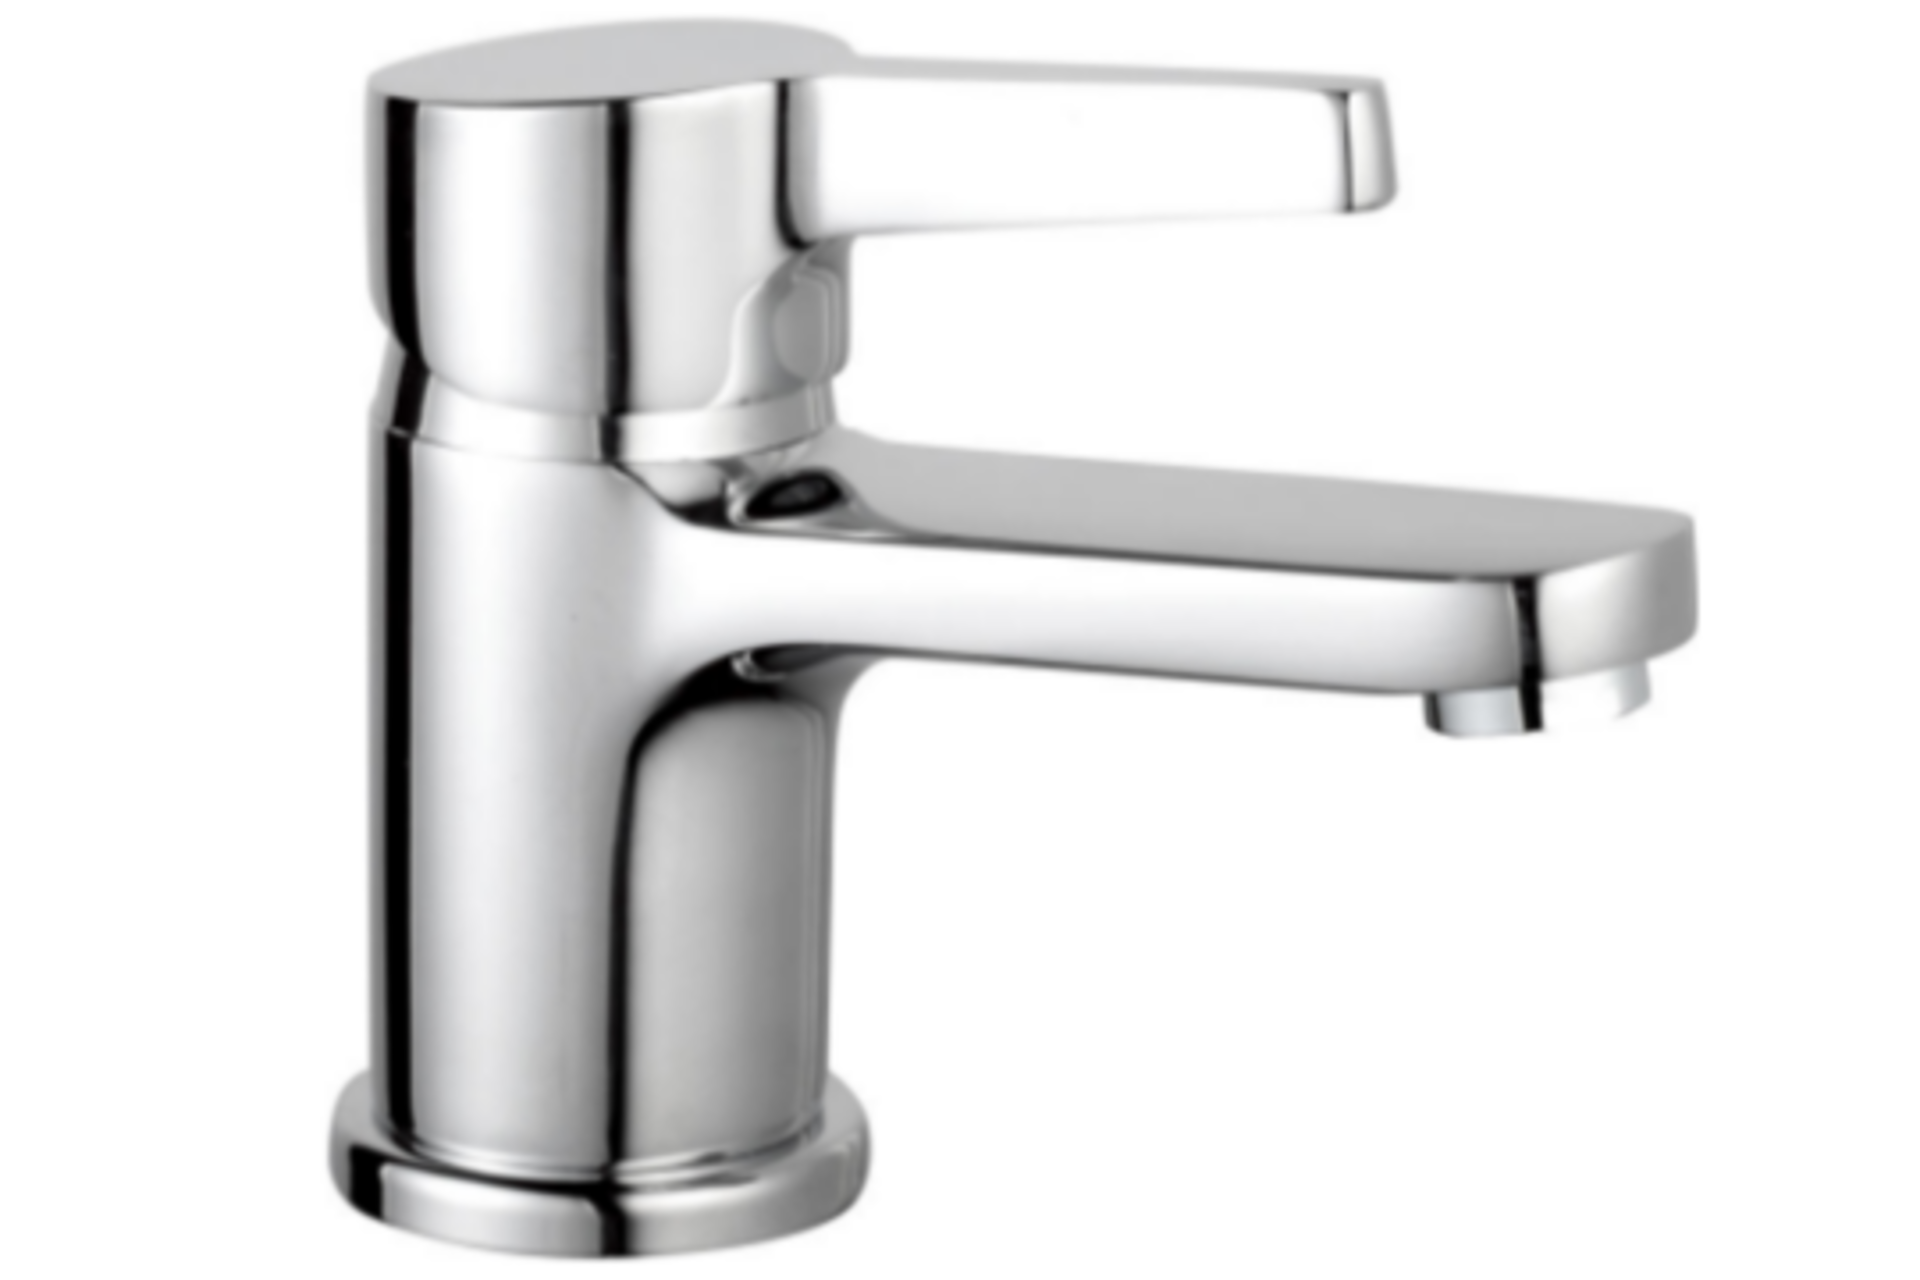 15 x NEW BOXED Abode Lamona CONTEMPORARY CHROME BATHROOM BASIN TAPS. RRP £59.99 EACH, GIVING THIS